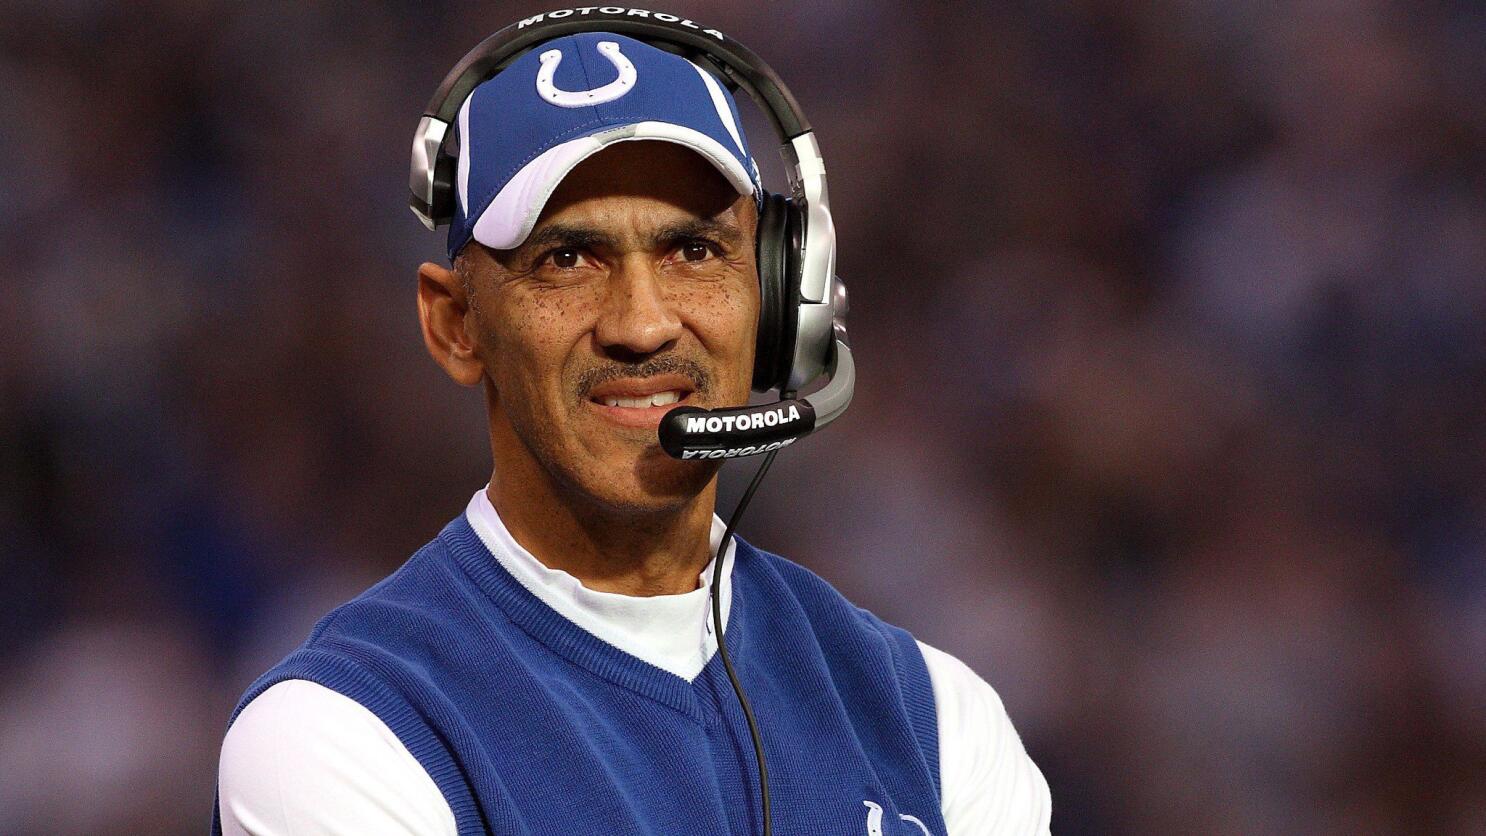 Tony Dungy's comments on openly gay NFL player Michael Sam